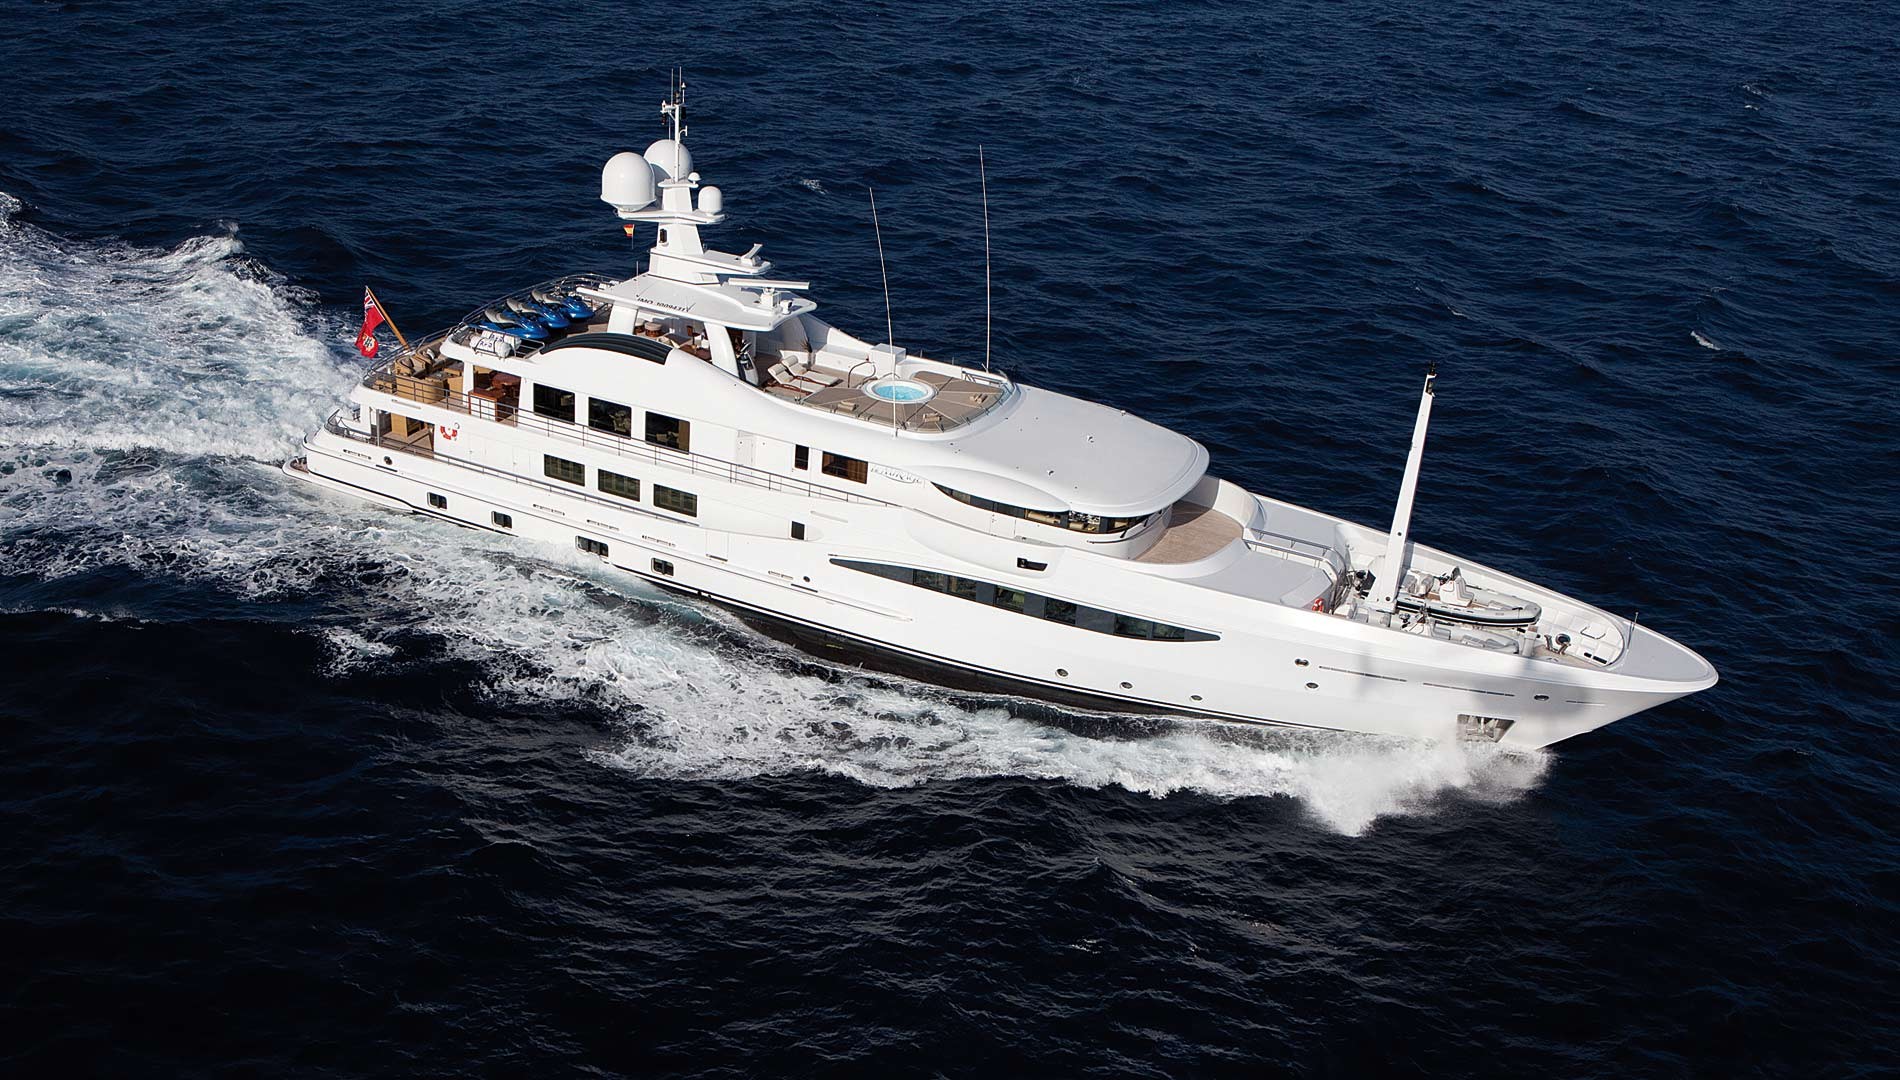 Aerial View Of The Superyacht